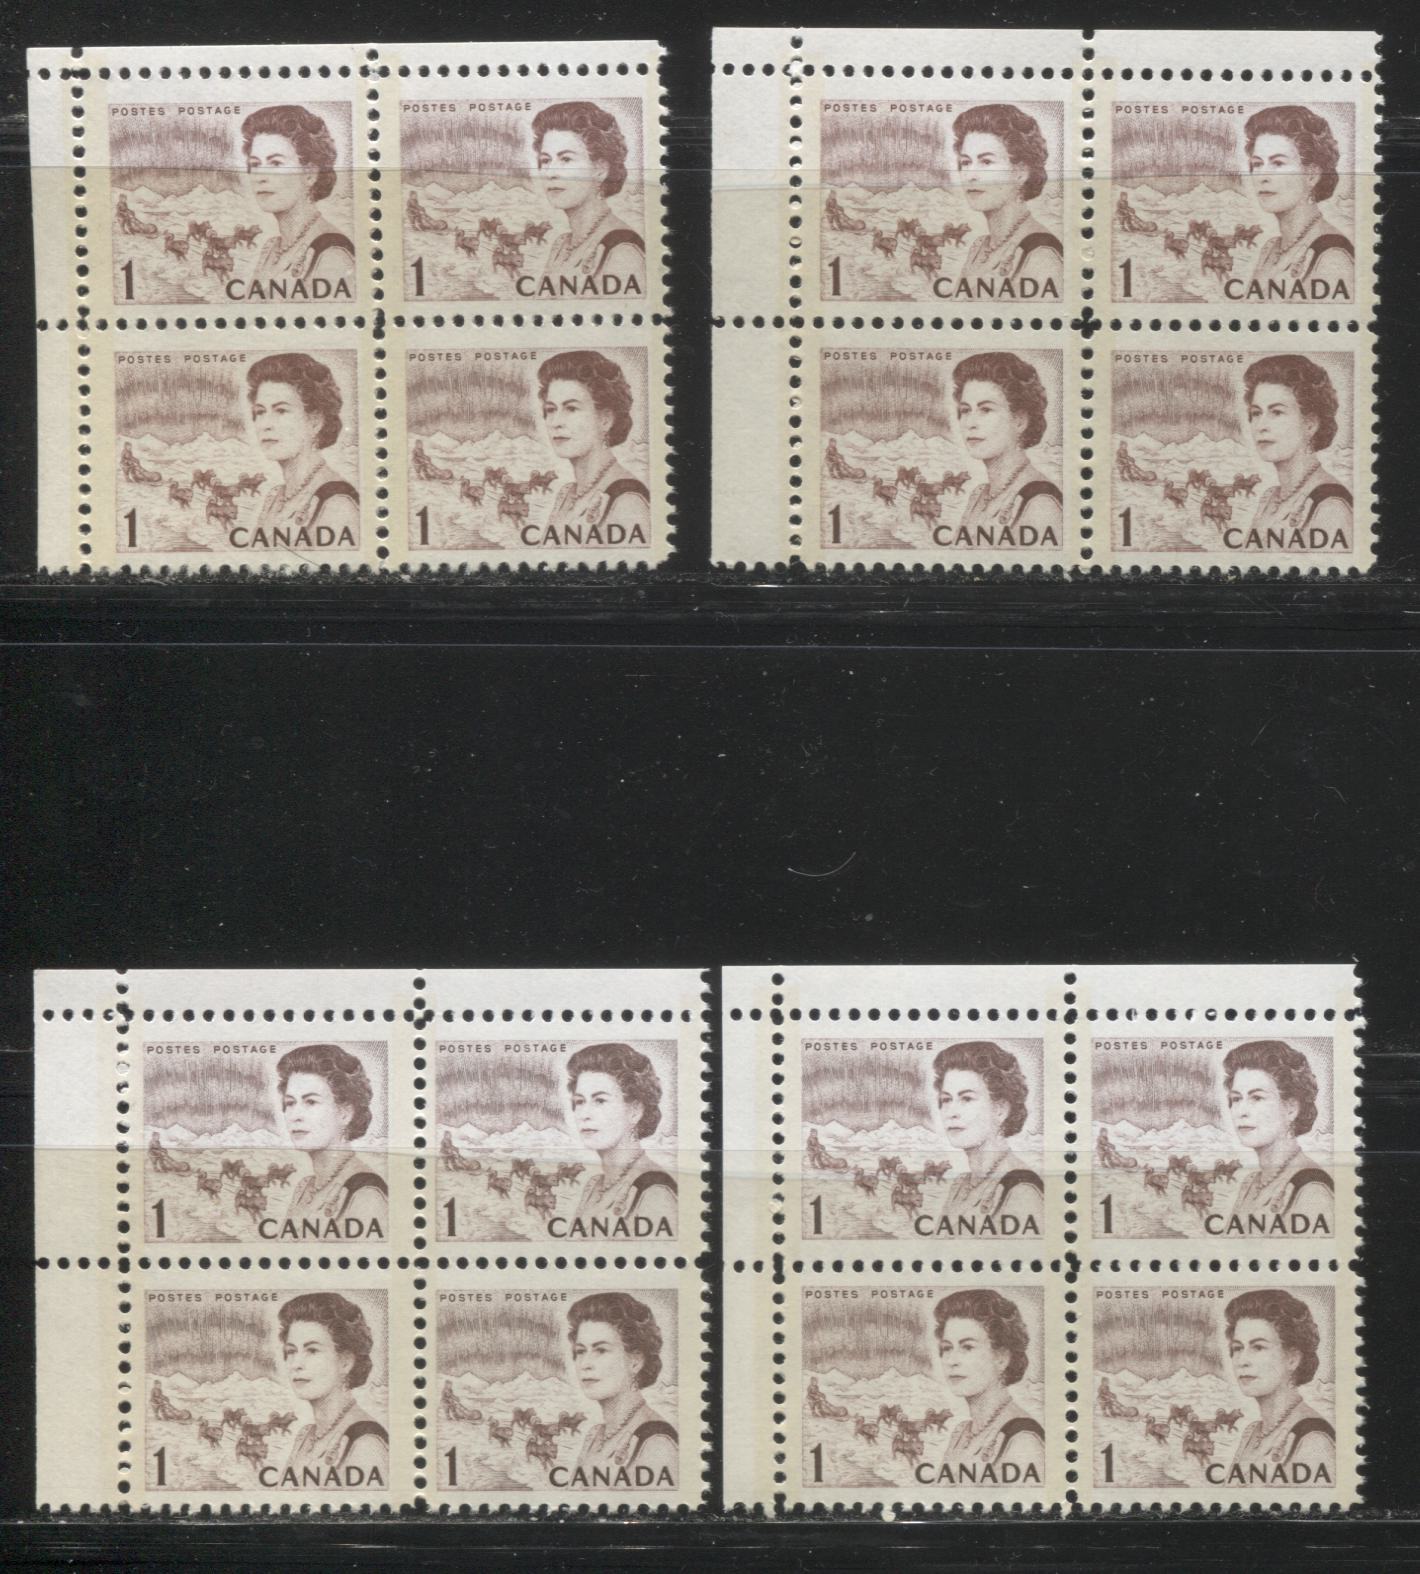 Lot #148 Canada #454piii 1c Reddish Brown, Reddish Chocolate & Chocolate, Northern Lights and Dogsled Team, 1967-1973 Centennial Issue, A Specialized Lot of 4 General Tagged Upper Left Corner Blocks on  LF-fl Bluish Violet Paper, PVA Gum